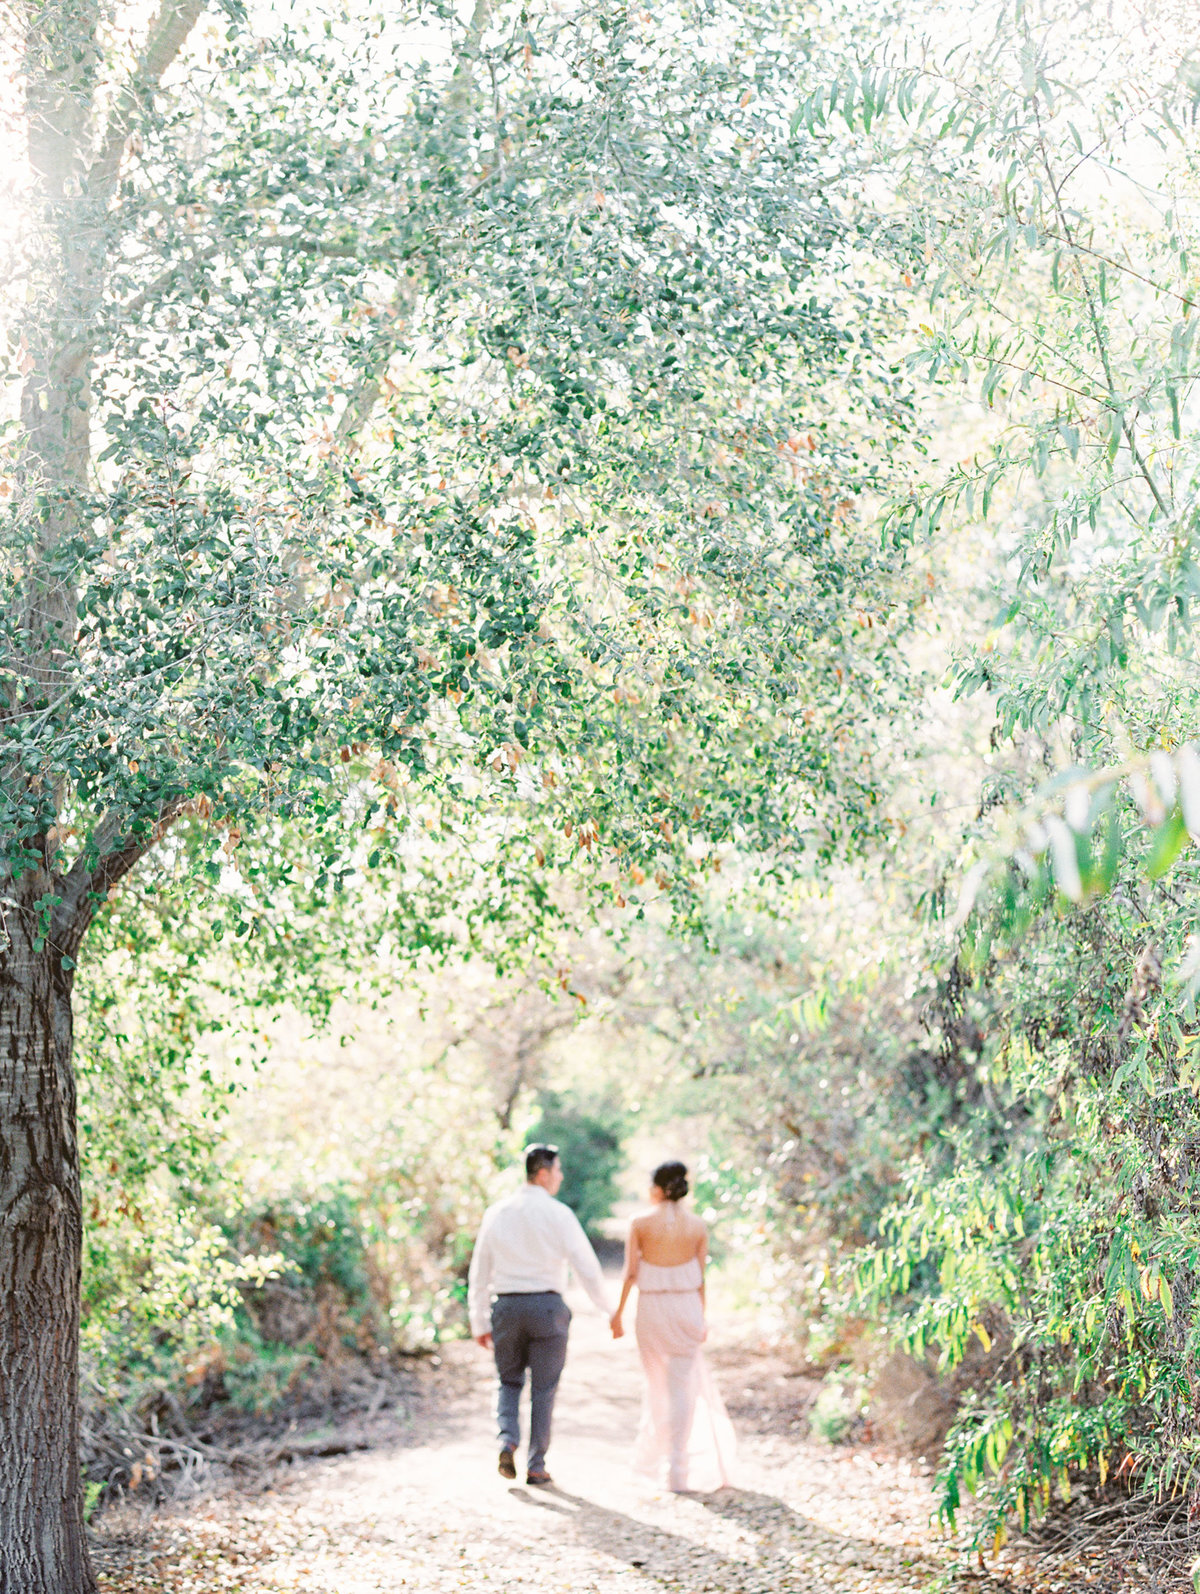 Babsie-Ly-Photography-Film-Engagement-at-the-park-nature-Orange-County-San-Diego-Stephanie-Tony-001